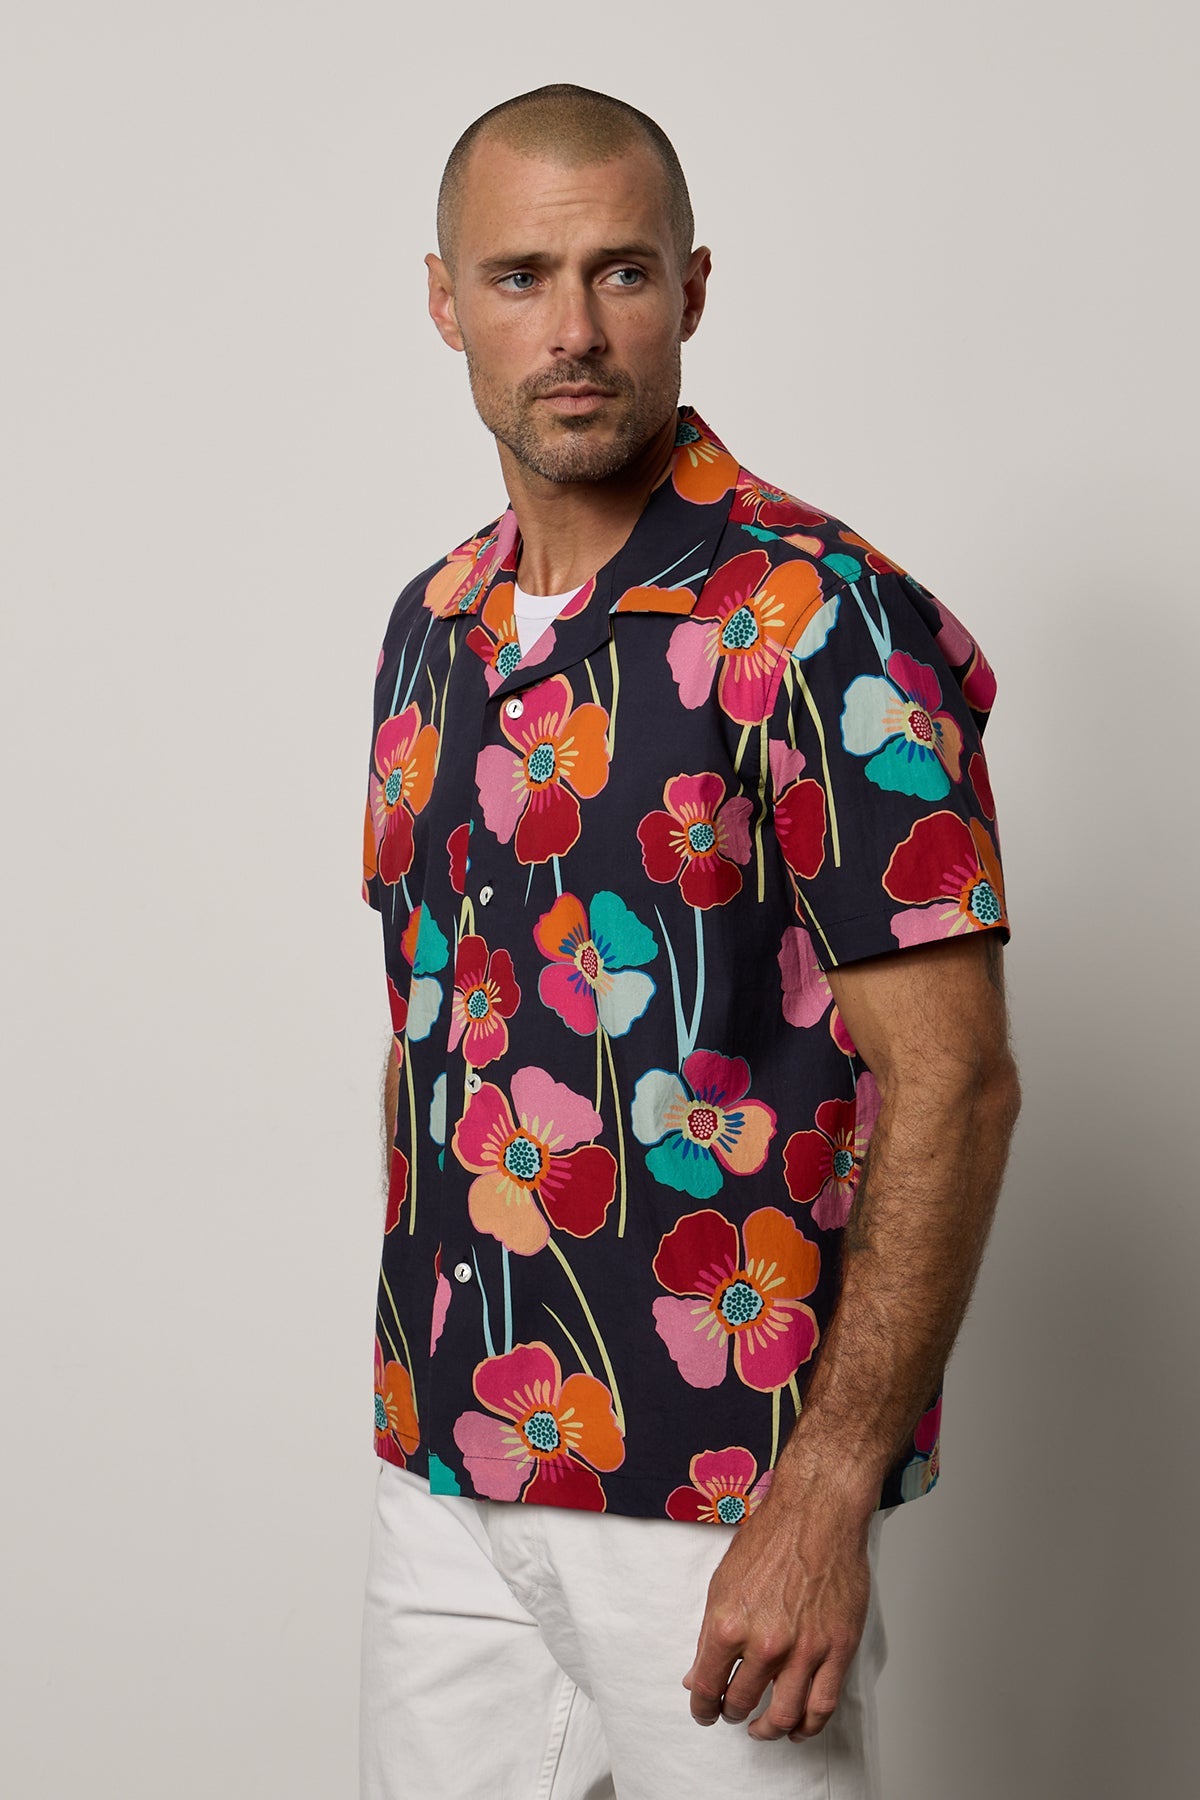   Iggy Button up shirt in Bahama print with large bold modern flower print on dark background with white denim front & side 